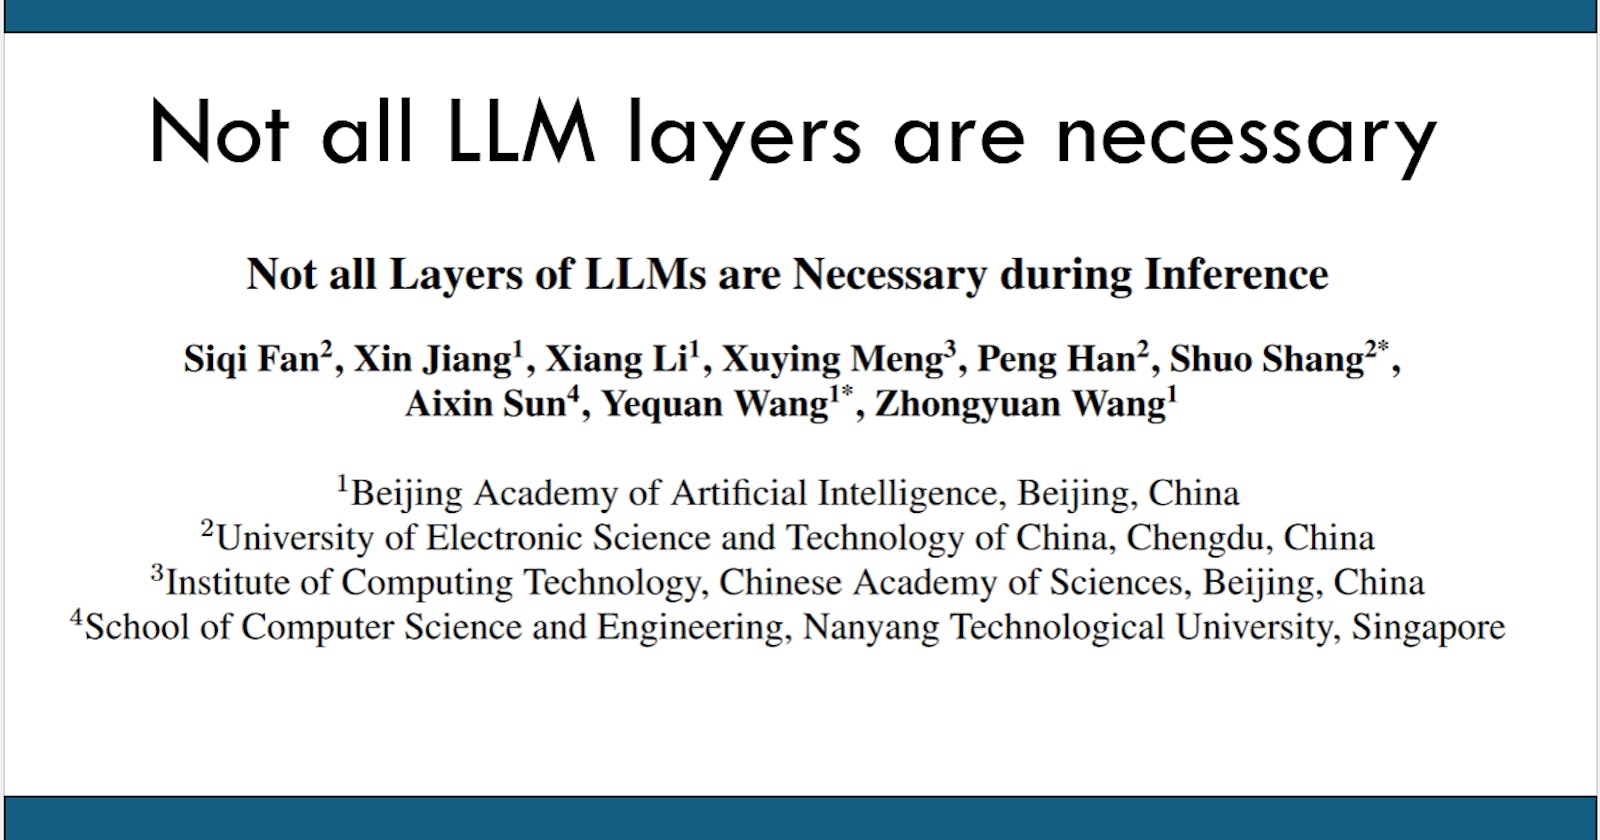 Not all Layers of LLMs are Necessary during Inference (Short Summary)